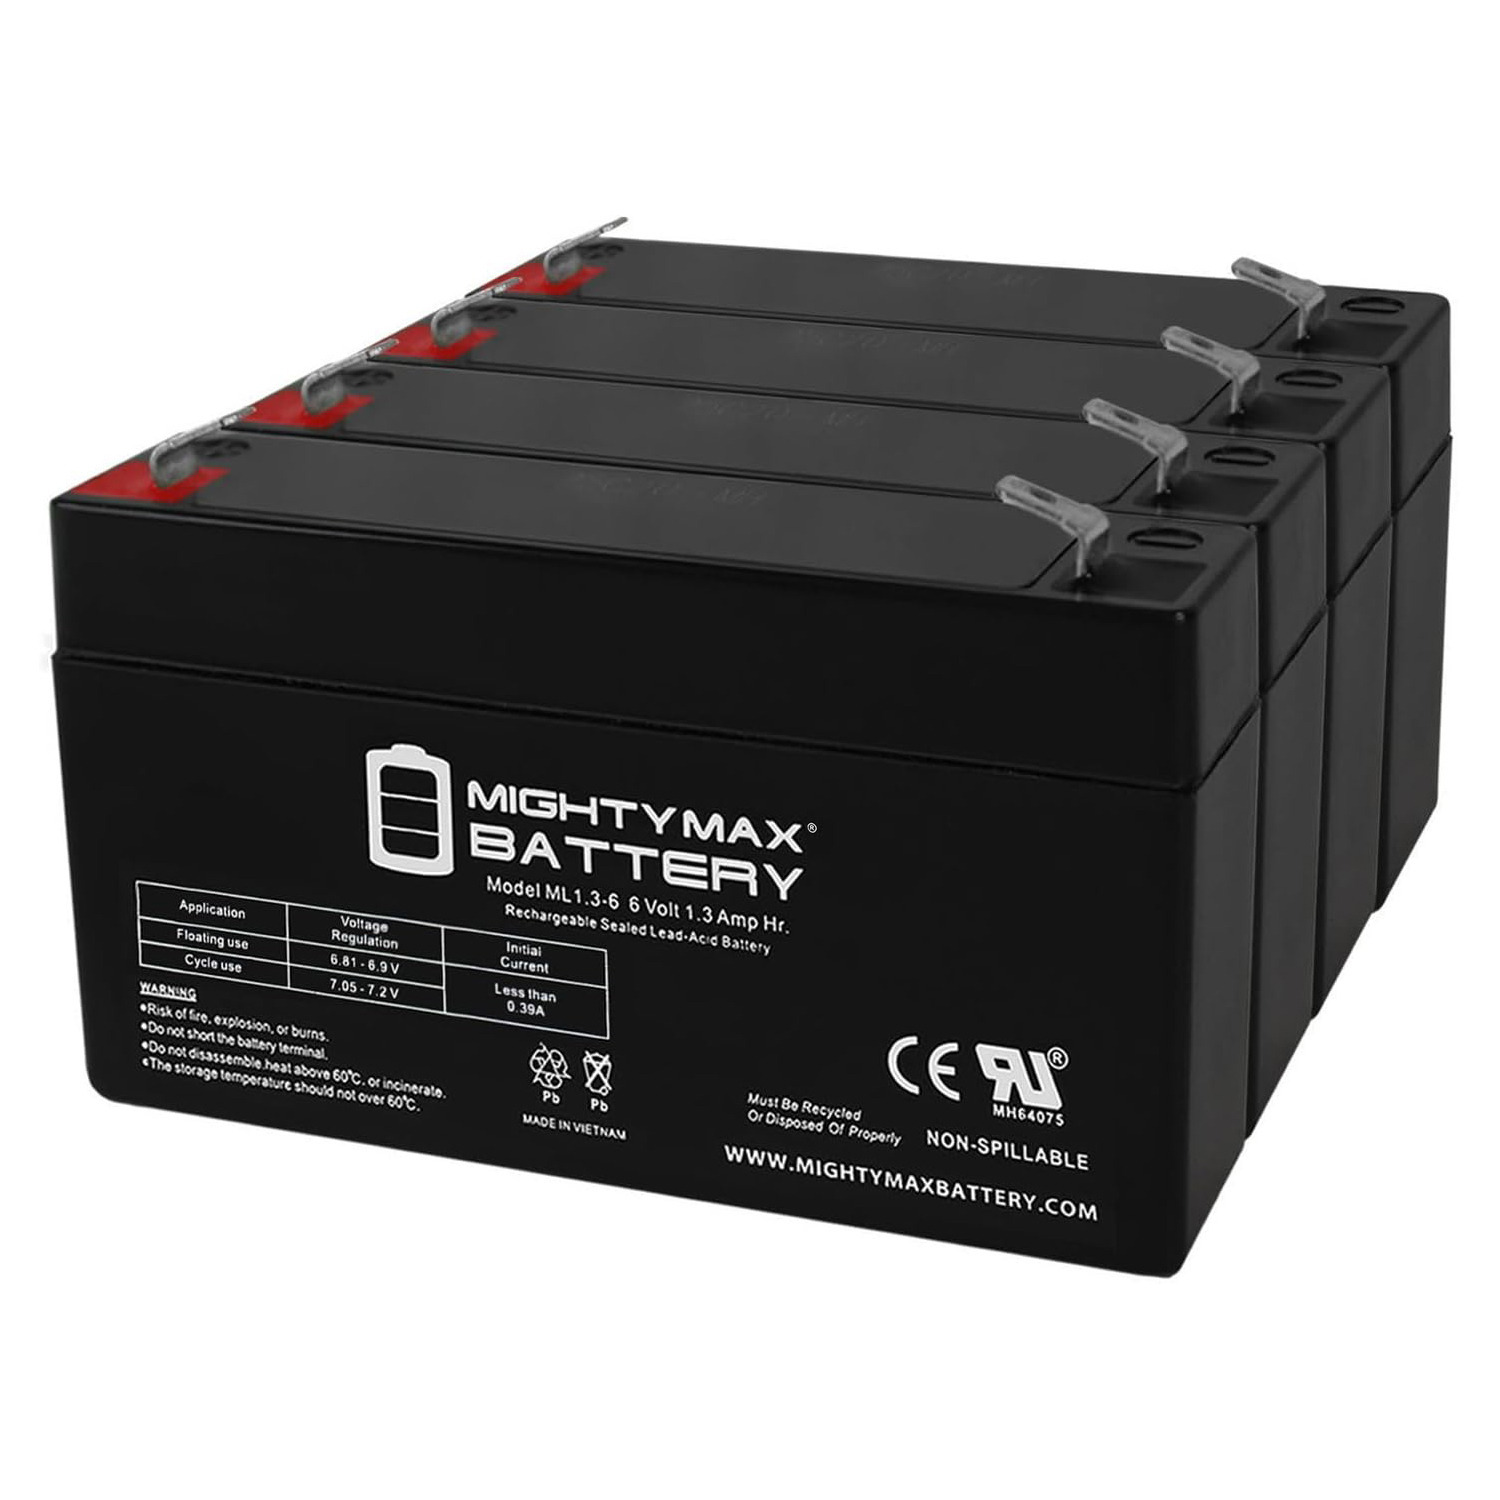 6V 1.3Ah SLA REPLACEMENT FOR 652001 E101 E101A H101 Battery - 4 Pack